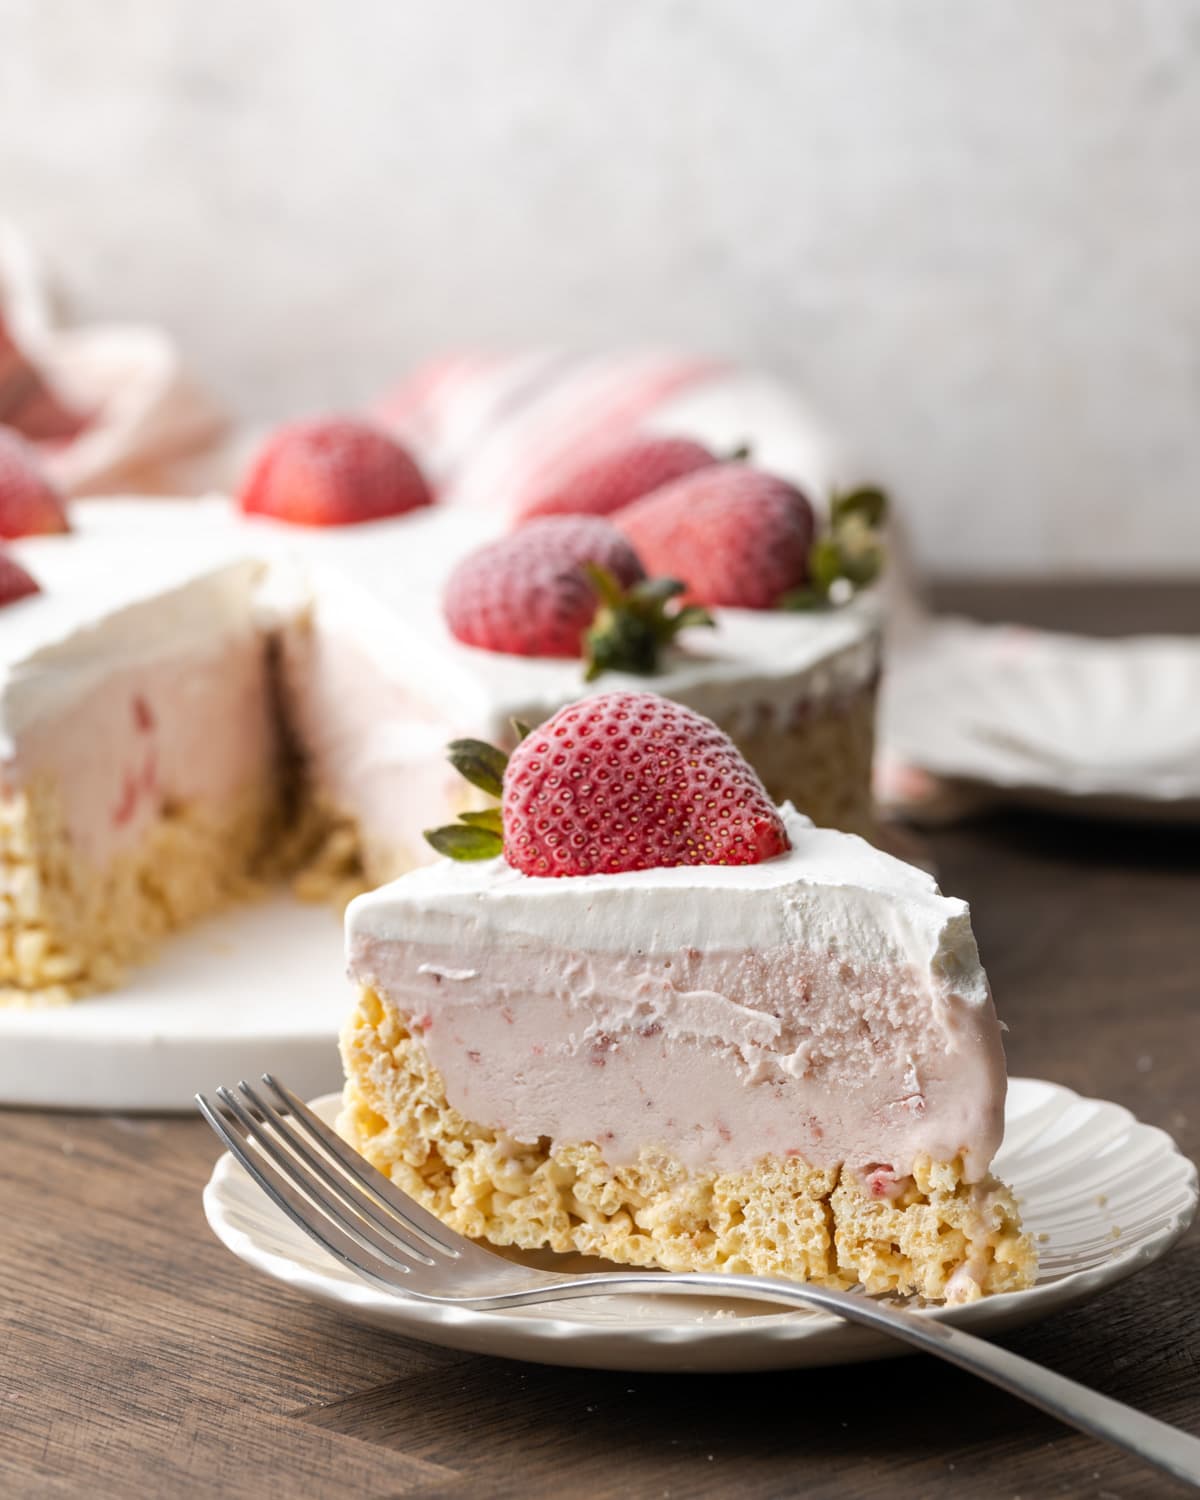 A slice of Krispie Treat ice cream pie on a white plate next to a fork, garnished with a fresh strawberry, with the rest of the pie in the background.